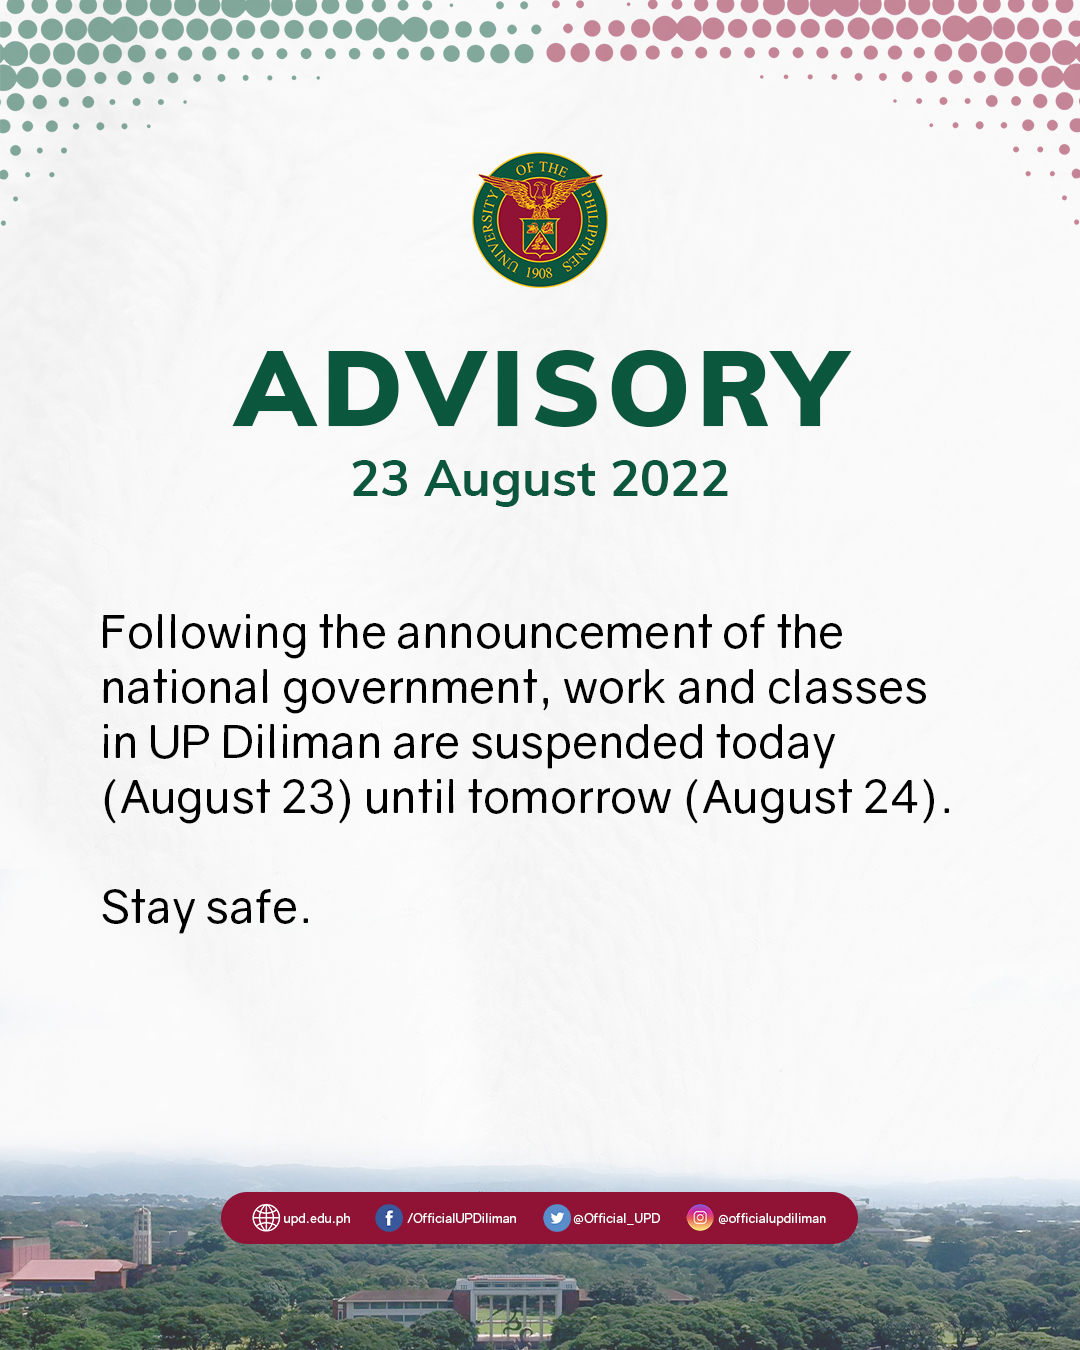 https://upd.edu.ph/wp-content/uploads/2022/08/UP-Diliman-Advisory-on-Suspension-of-Work-and-Classes-23-August-2022.jpg